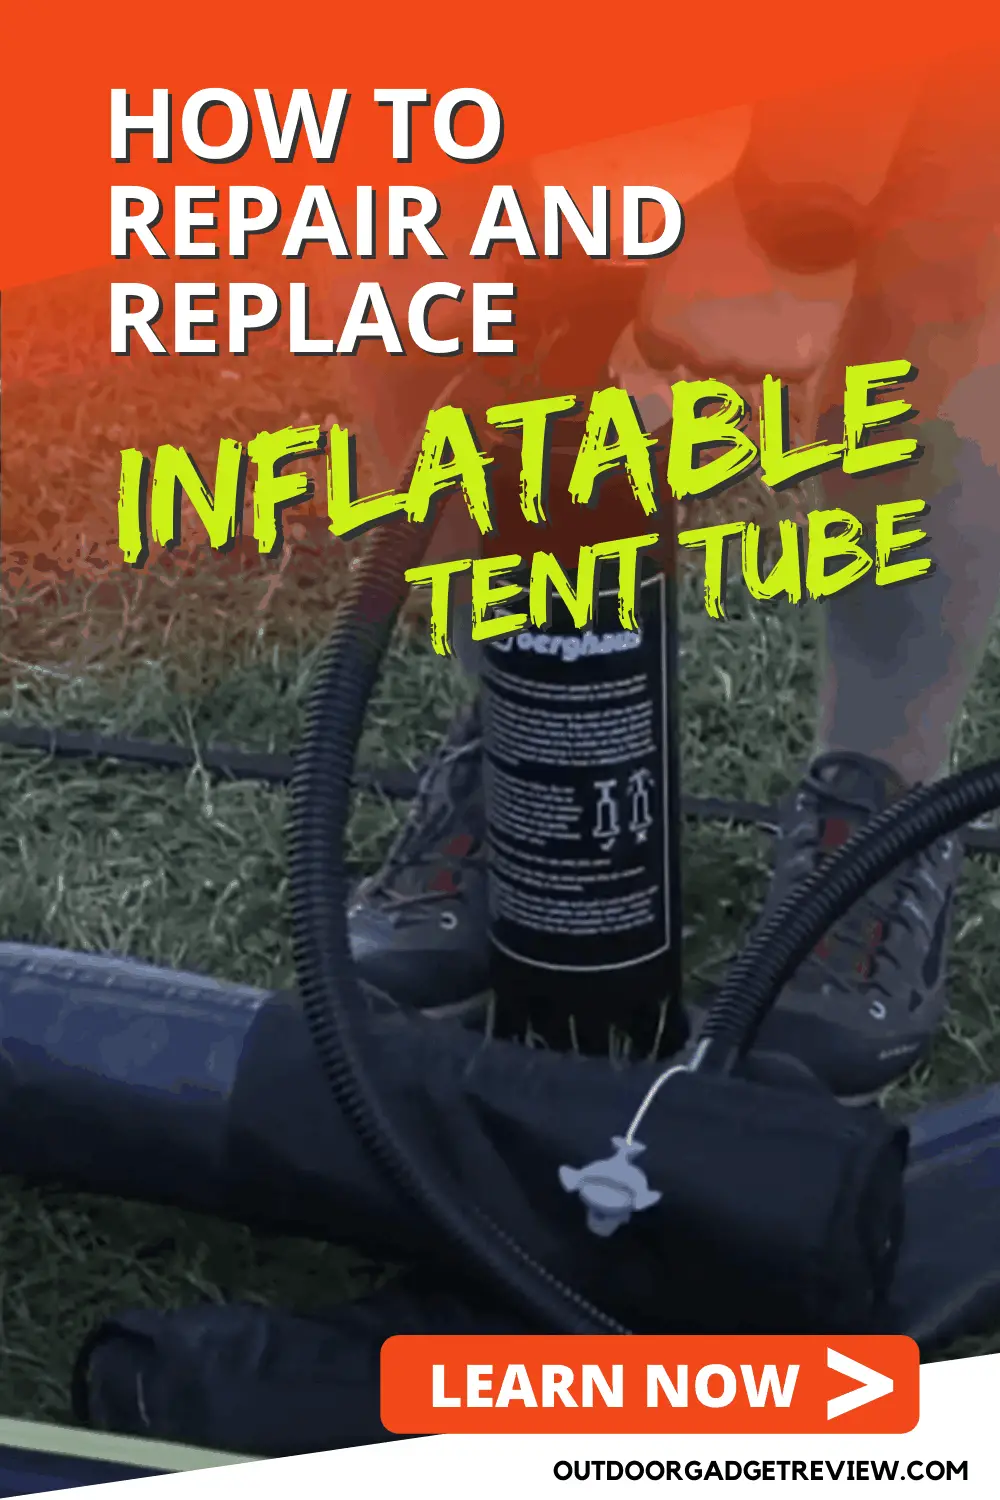 How to Repair and Replace an Inflatable Tent Tube